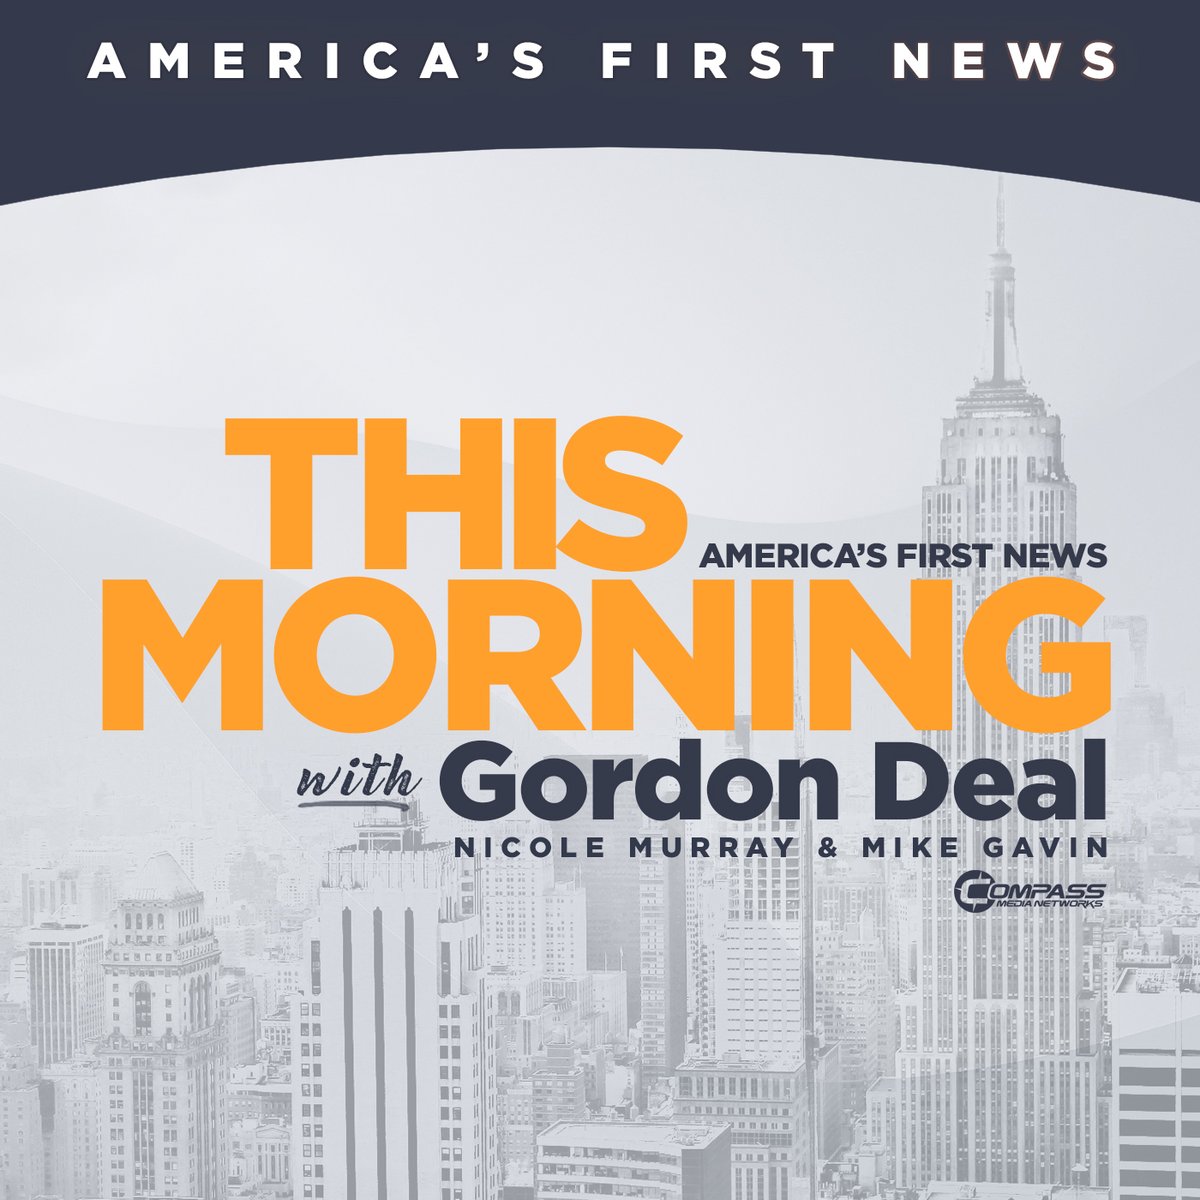 Is the Trump campaign hoping a jail sentence could be good for business? @ShelbyTalcott from @Semafor has the story. @GordonDeal #AmericasFirstNews thismorningwithgordondeal.com/n/arydip